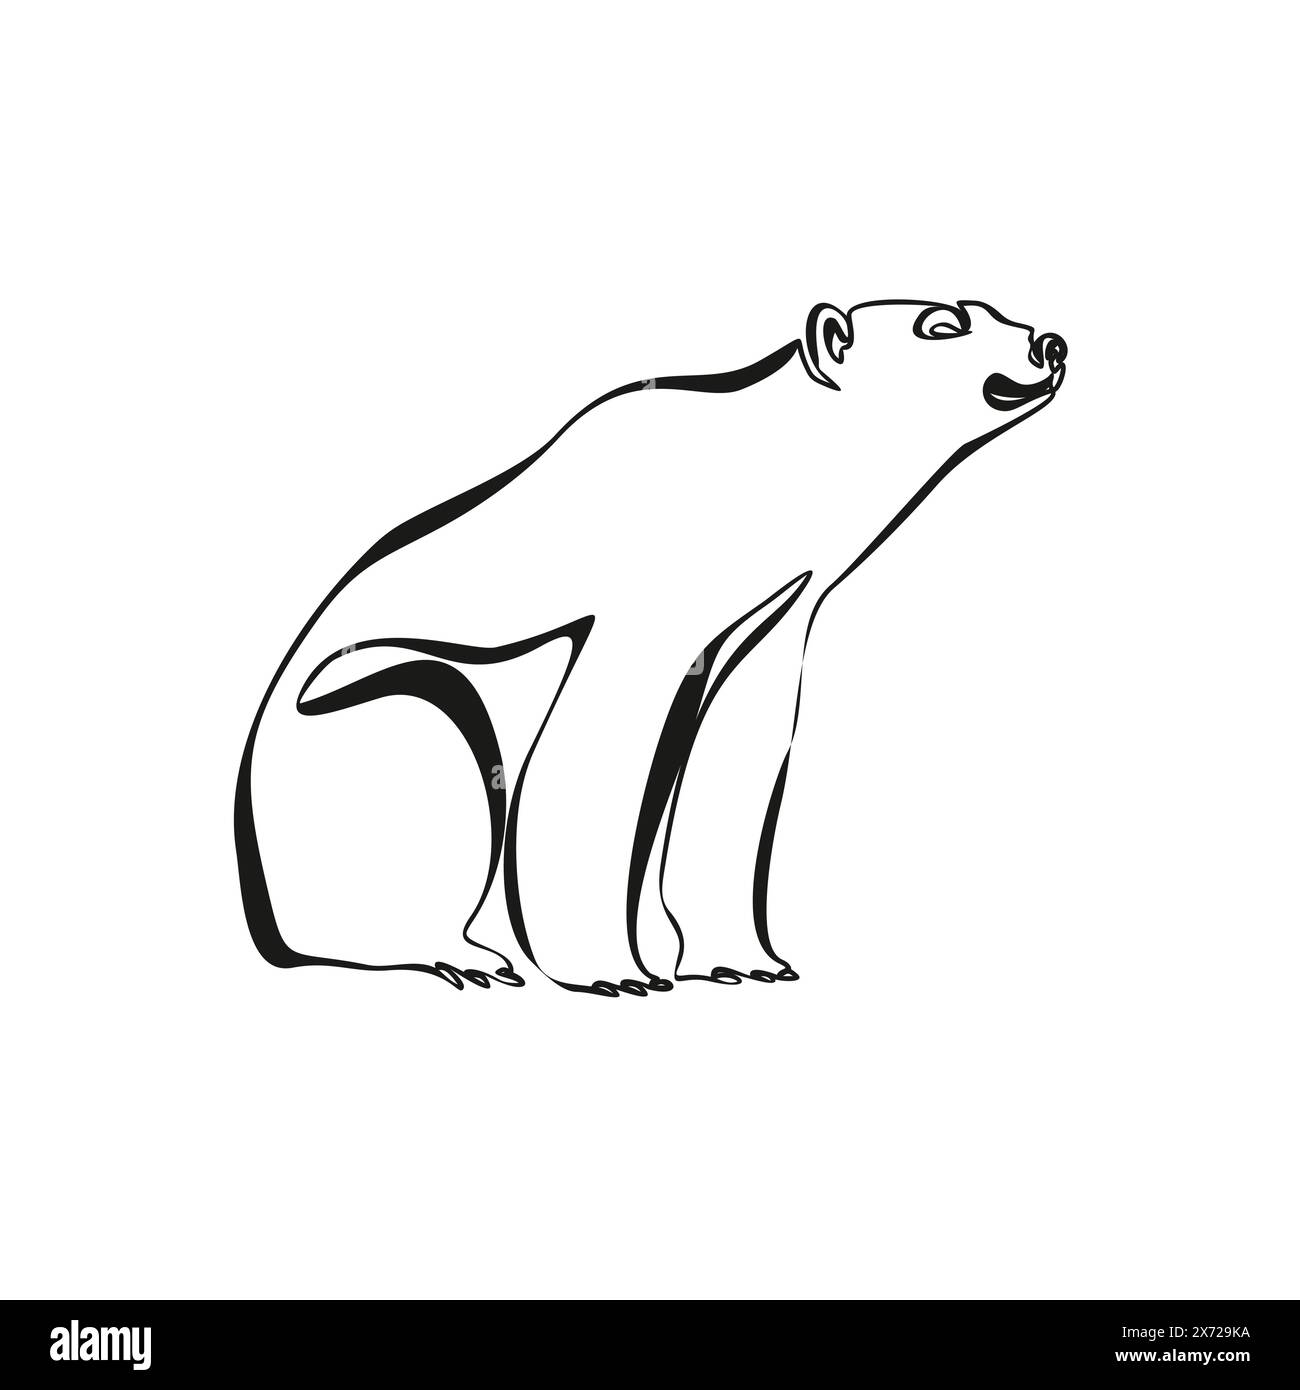 Polar bear silhouette. Simple icon. Flat style element for graphic design. Continuous line minimalistic design Stock Vector